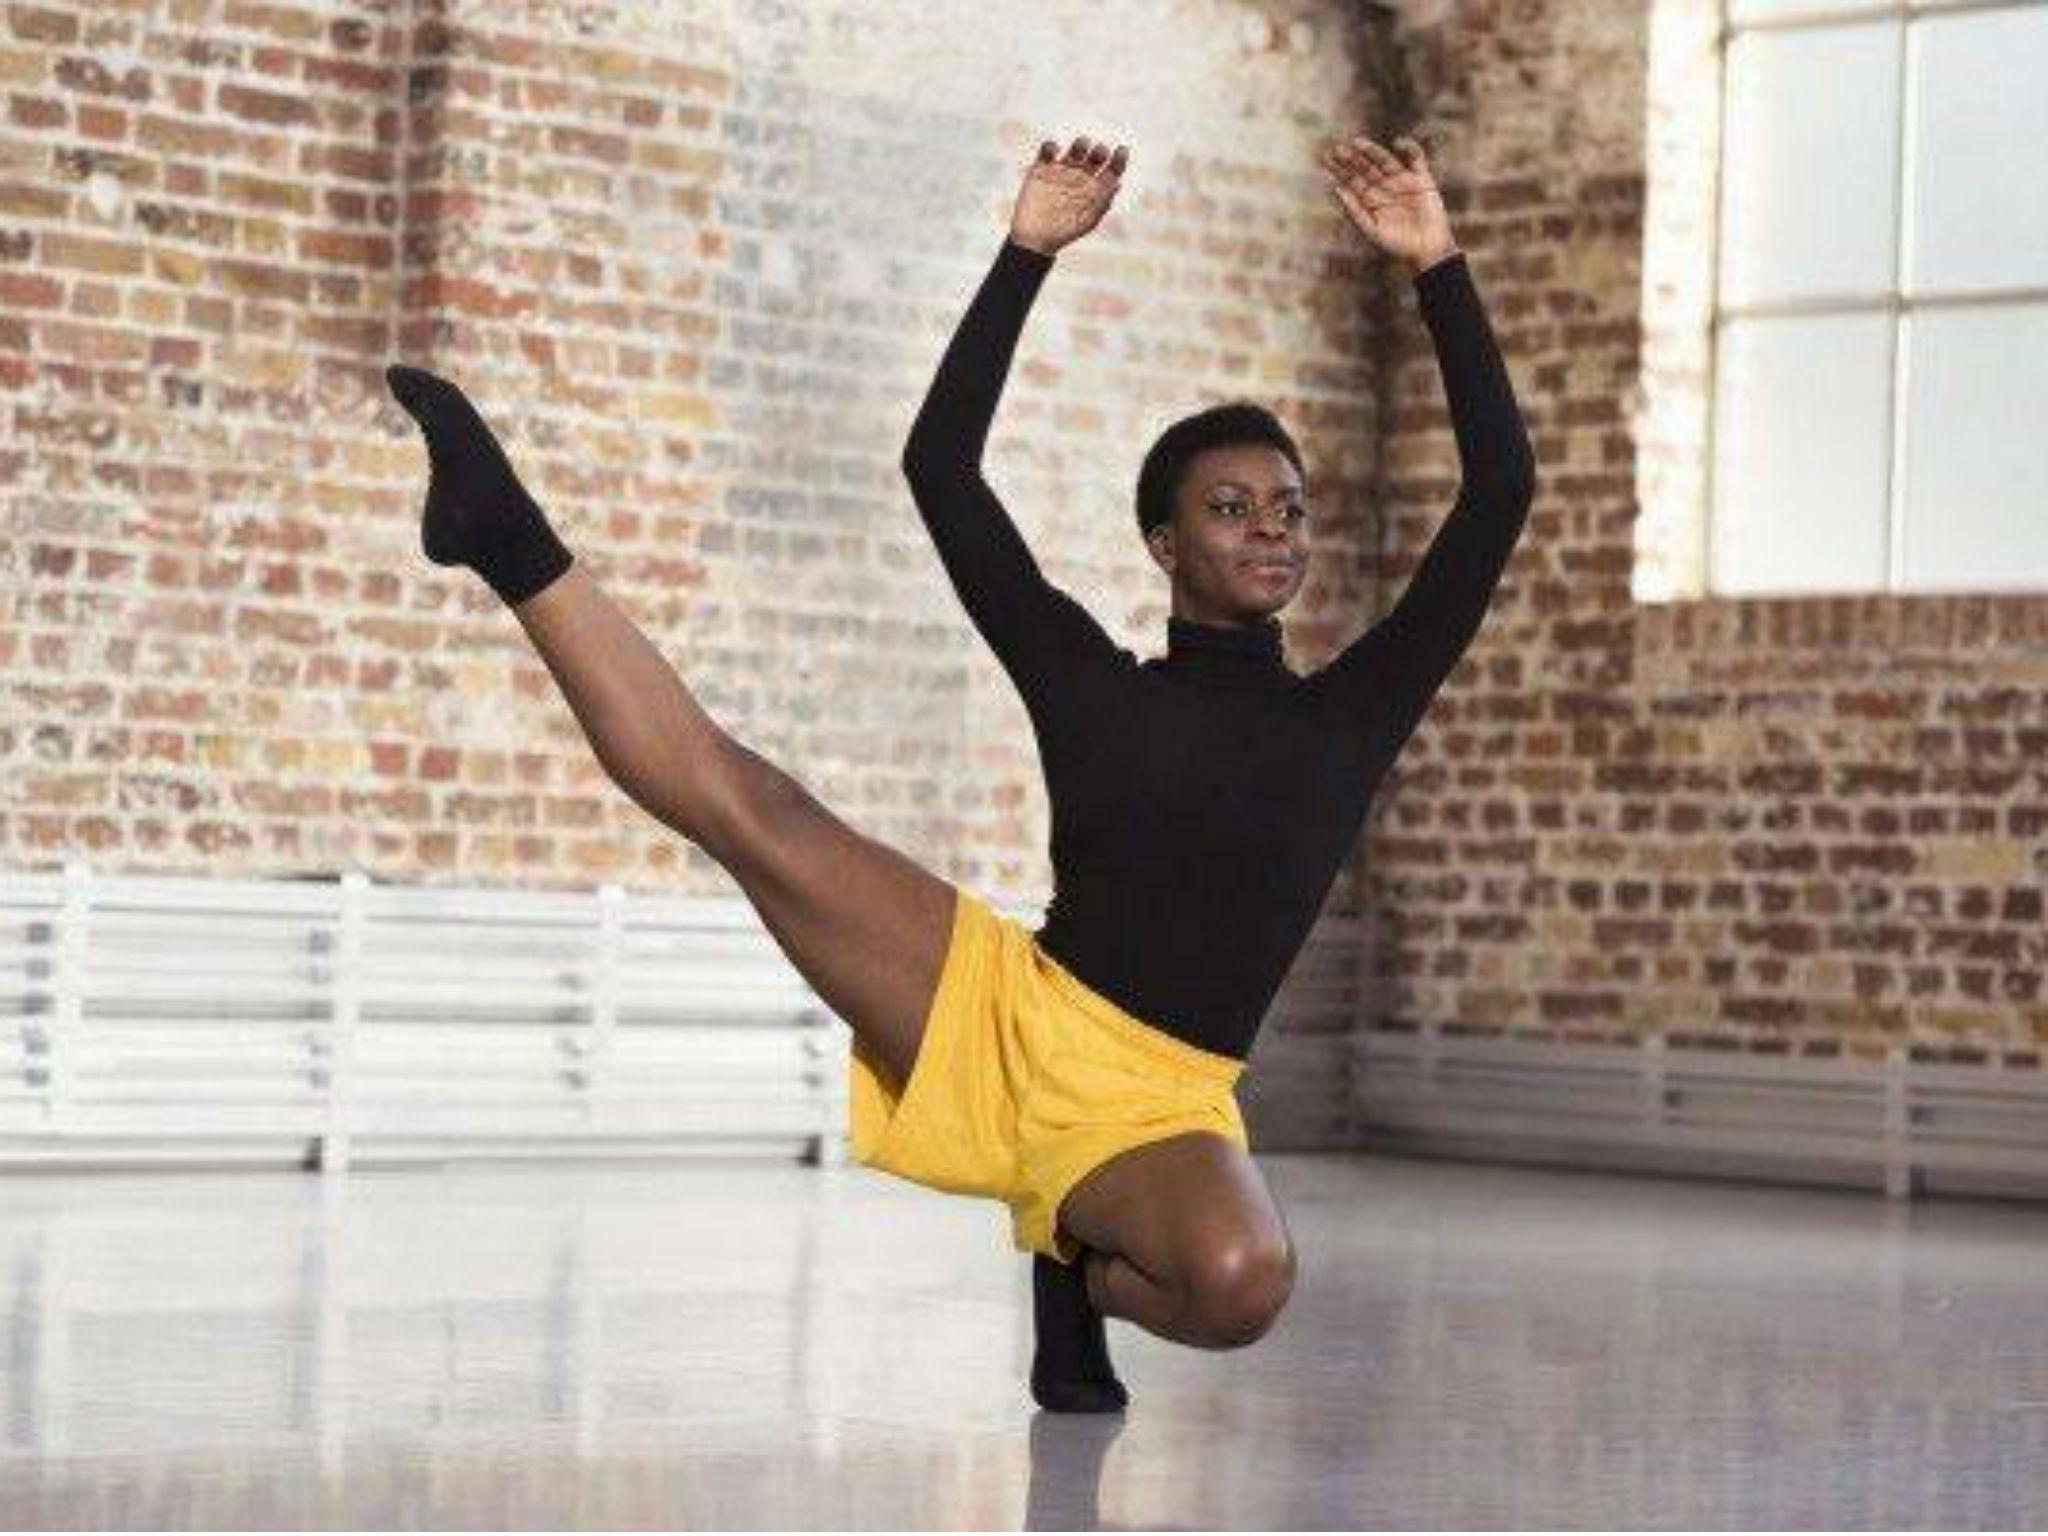 Commanding presence: BBC Young Dancer winner Nafisah Baba, part of a fresh, dynamic and eclectic collection of groups, acts and styles